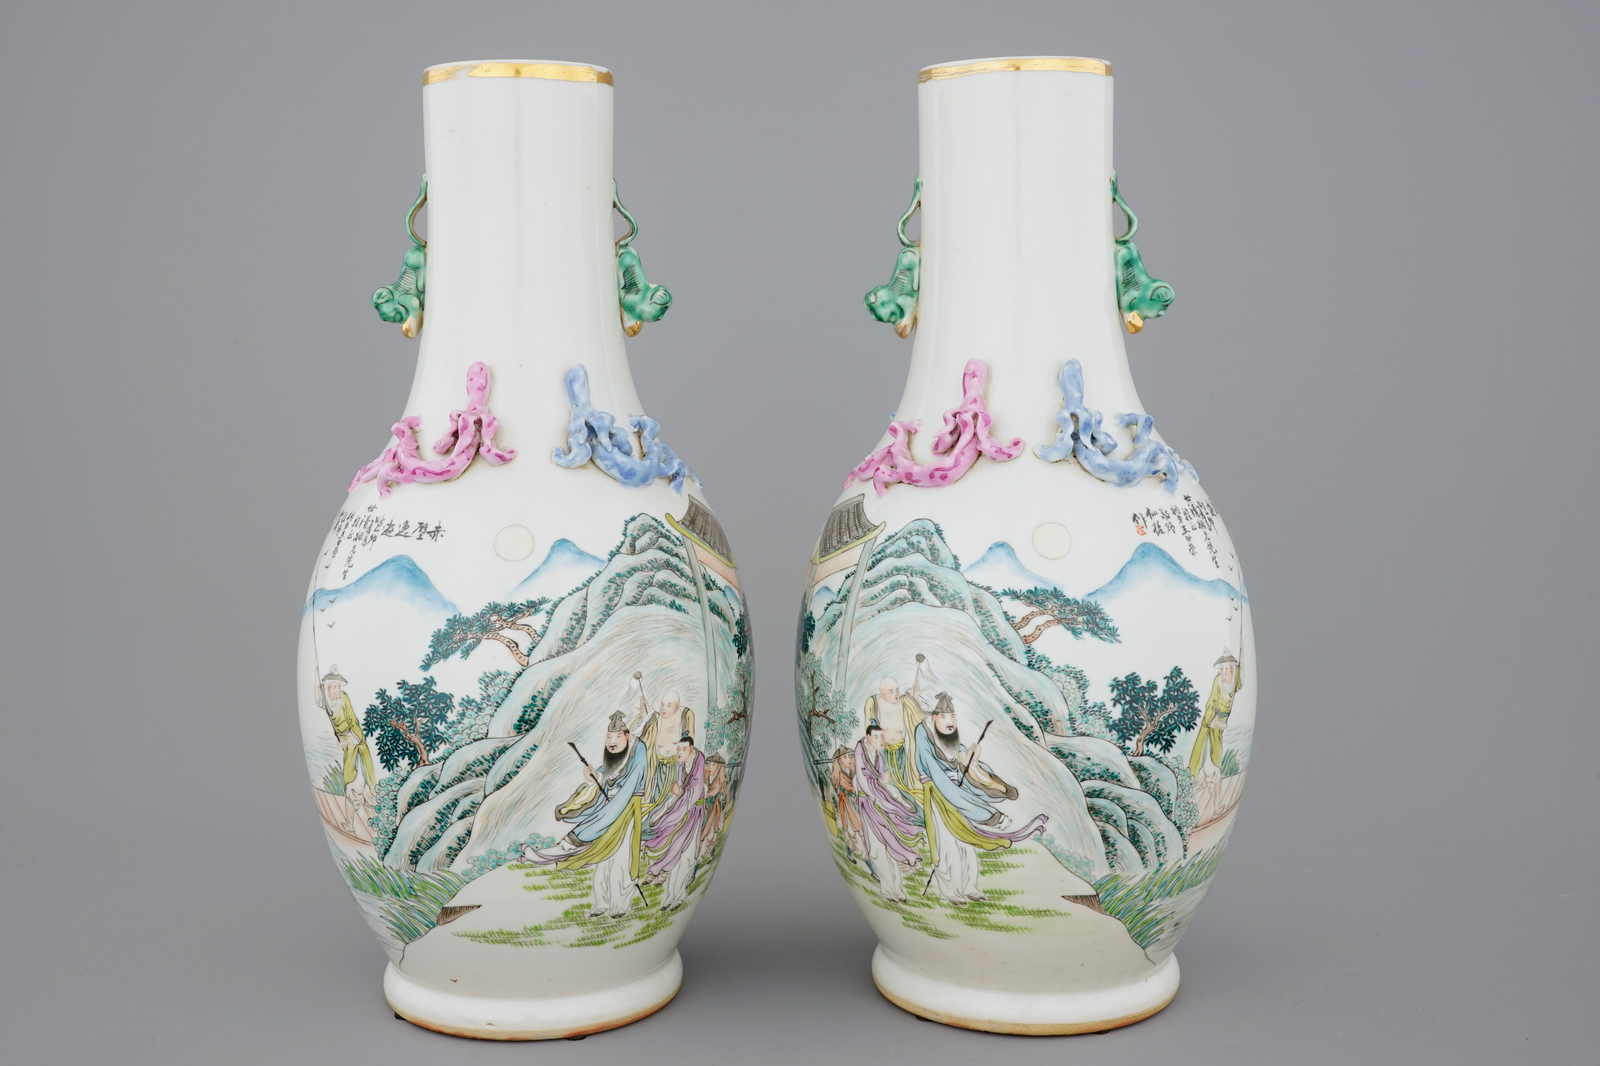 An unusual pair of Chinese famille rose landscape vases, early 20th C. H.: 46 cm - Dia.: 22 cm